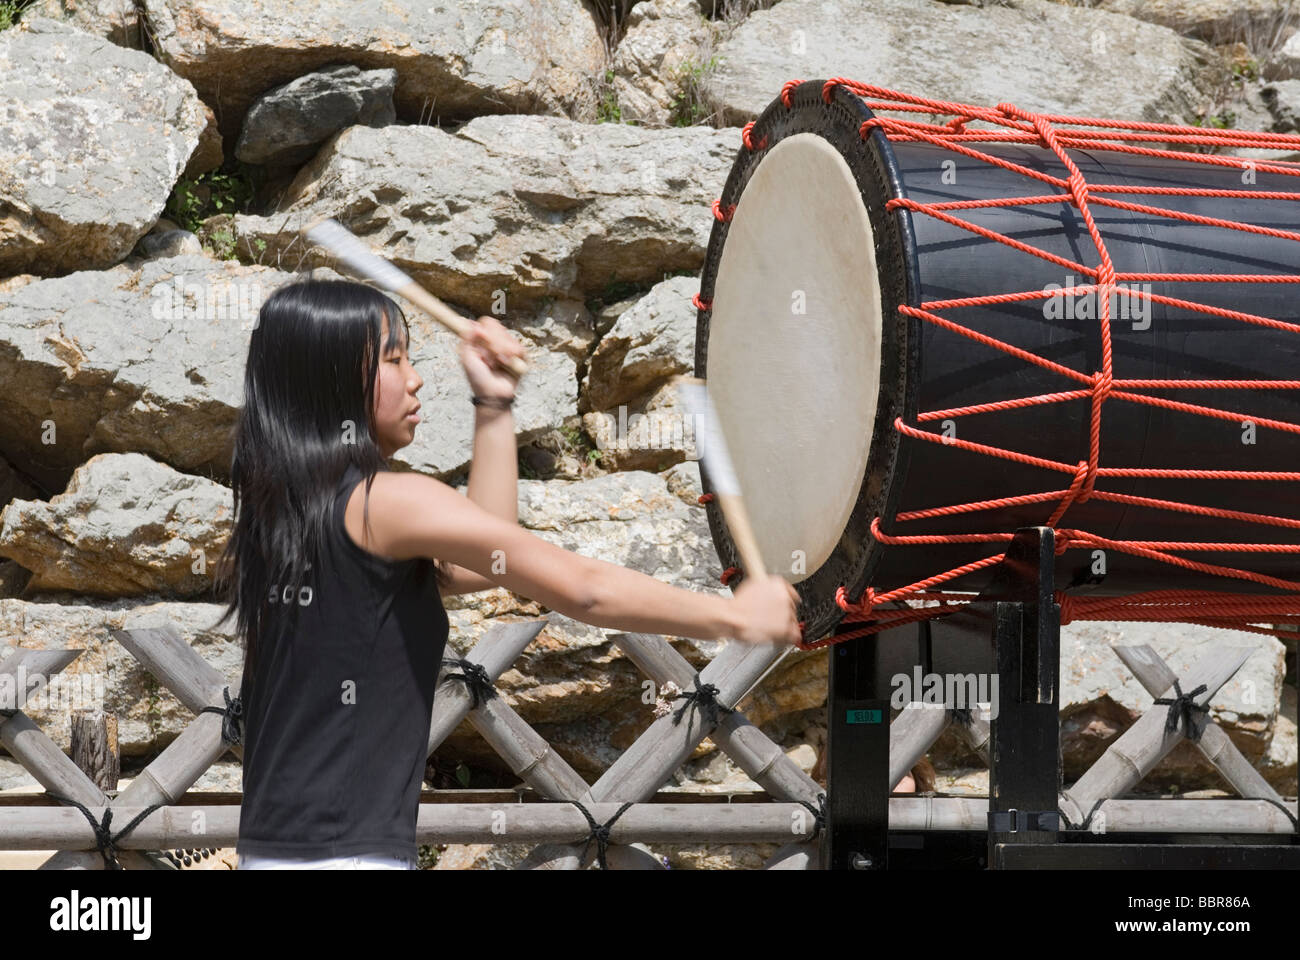 A teenage girl drummer troupe pounds out rhythms on traditional Japanese taiko drums Stock Photo